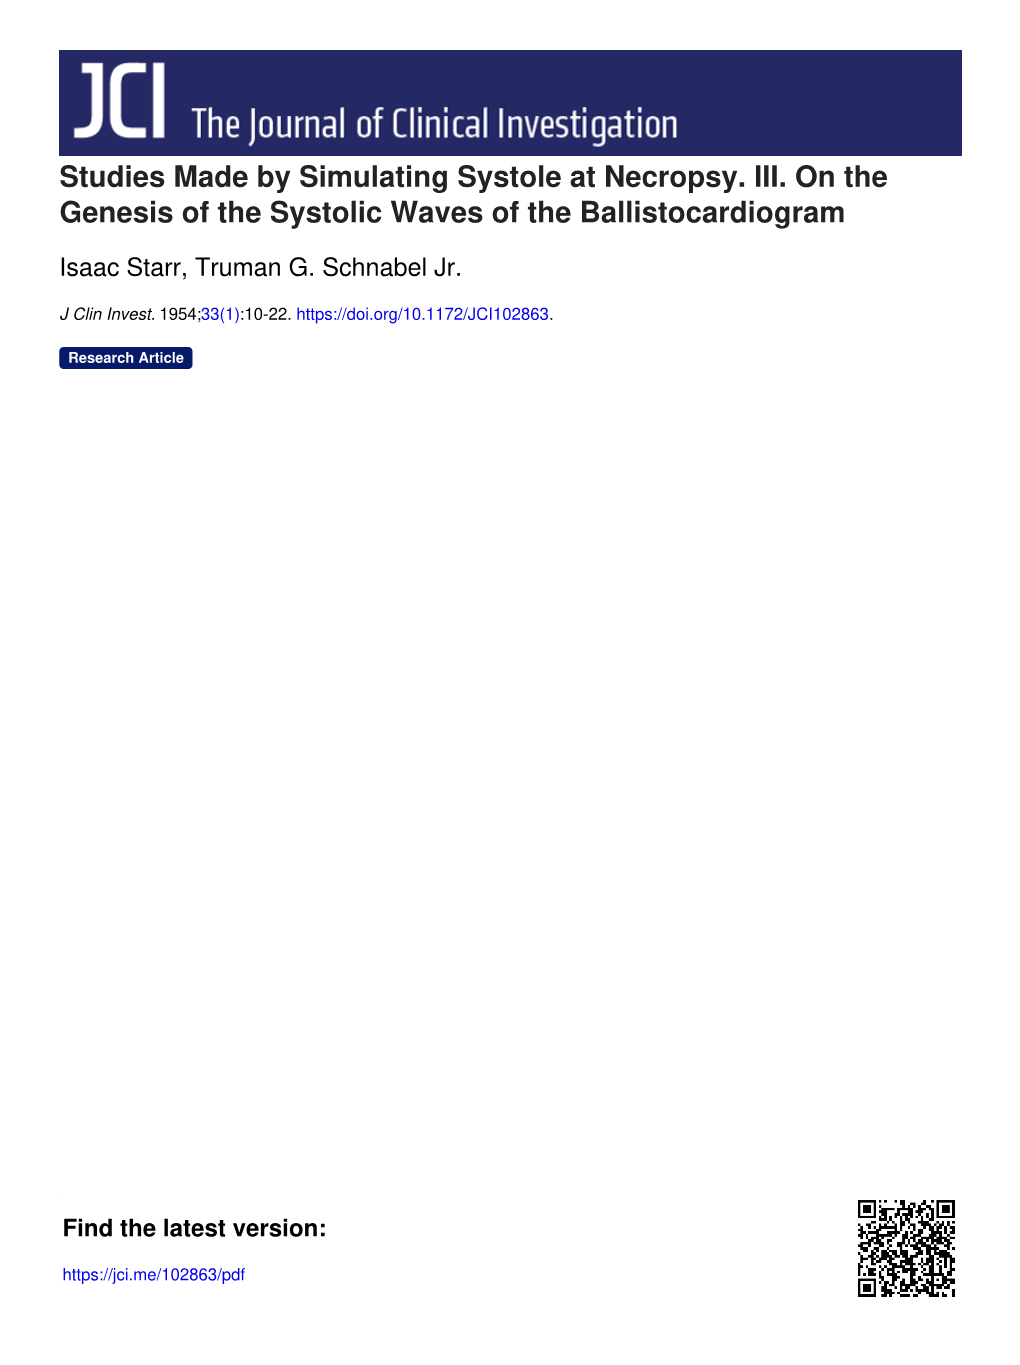 Studies Made by Simulating Systole at Necropsy. III. on the Genesis of the Systolic Waves of the Ballistocardiogram